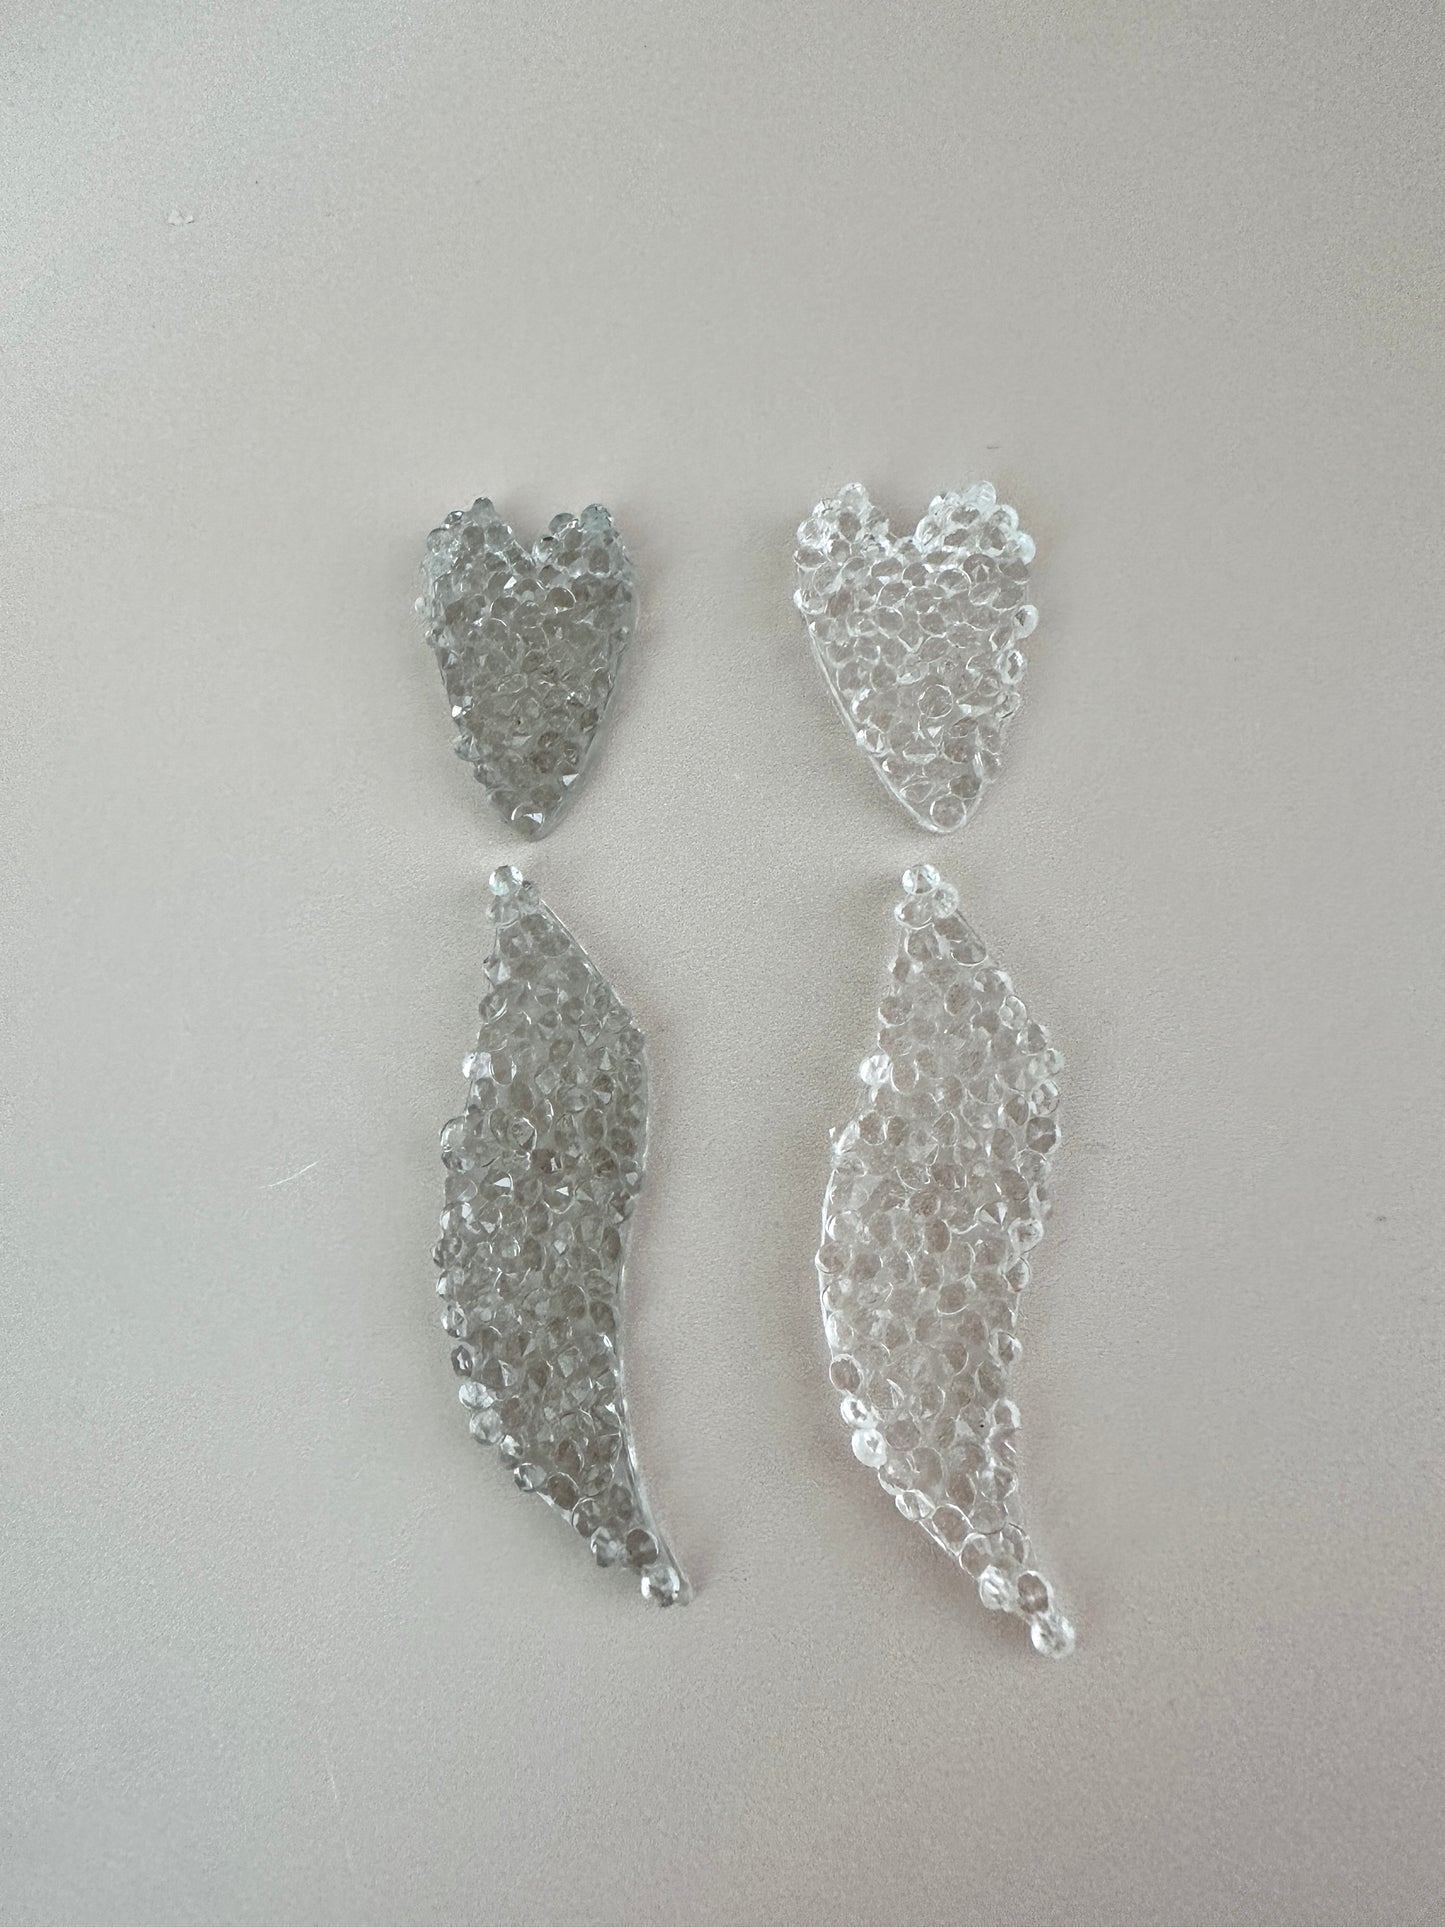 Silicone Mold Crystal Shapes in the Form of Leaves and Hearts for Crafting Jewelry, Keychains, and Pendants